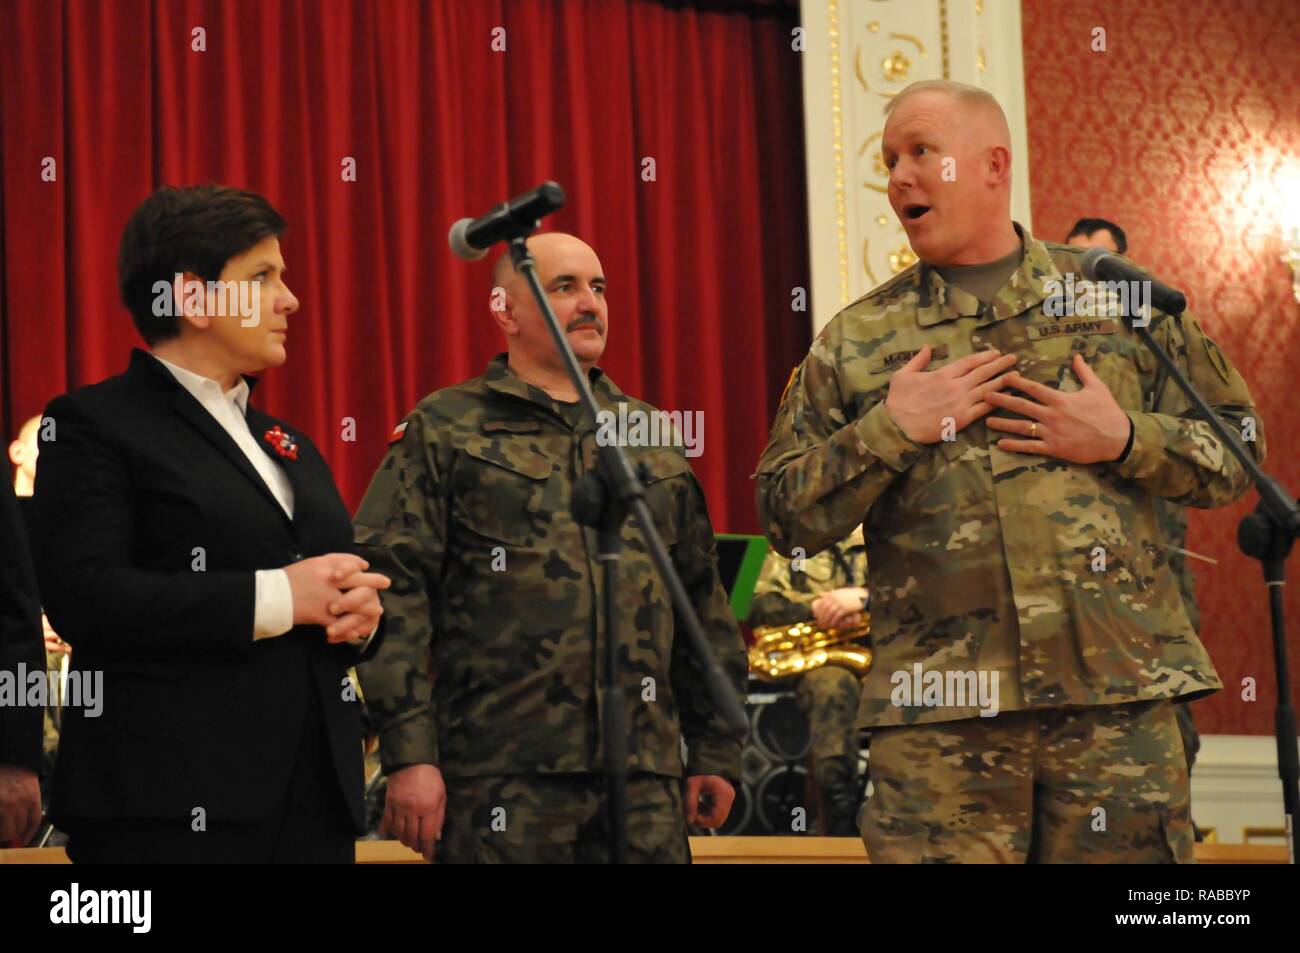 (right) U.S. Army Maj. Gen. Timothy McGuire, deputy commanding general, U.S. Army Europe, speaks (left) Polish Prime Minister Beata Szydlo, dignitaries, and U.S. and Polish Soldiers during an informal dinner on Safe Poland Day in the Crystal Palace in Zagan, Poland, January 14, 2017. U.S. Army Soldiers assigned to 3rd Armored Brigade Combat Team, 4th Infantry Division, recently arrived in Poland, marking the start of back-to-back rotations of armored brigades in Europe as part of Operation Atlantic Resolve. Vehicles and equipment, totaling more than 2,700 pieces, are being shipped to Poland fo Stock Photo